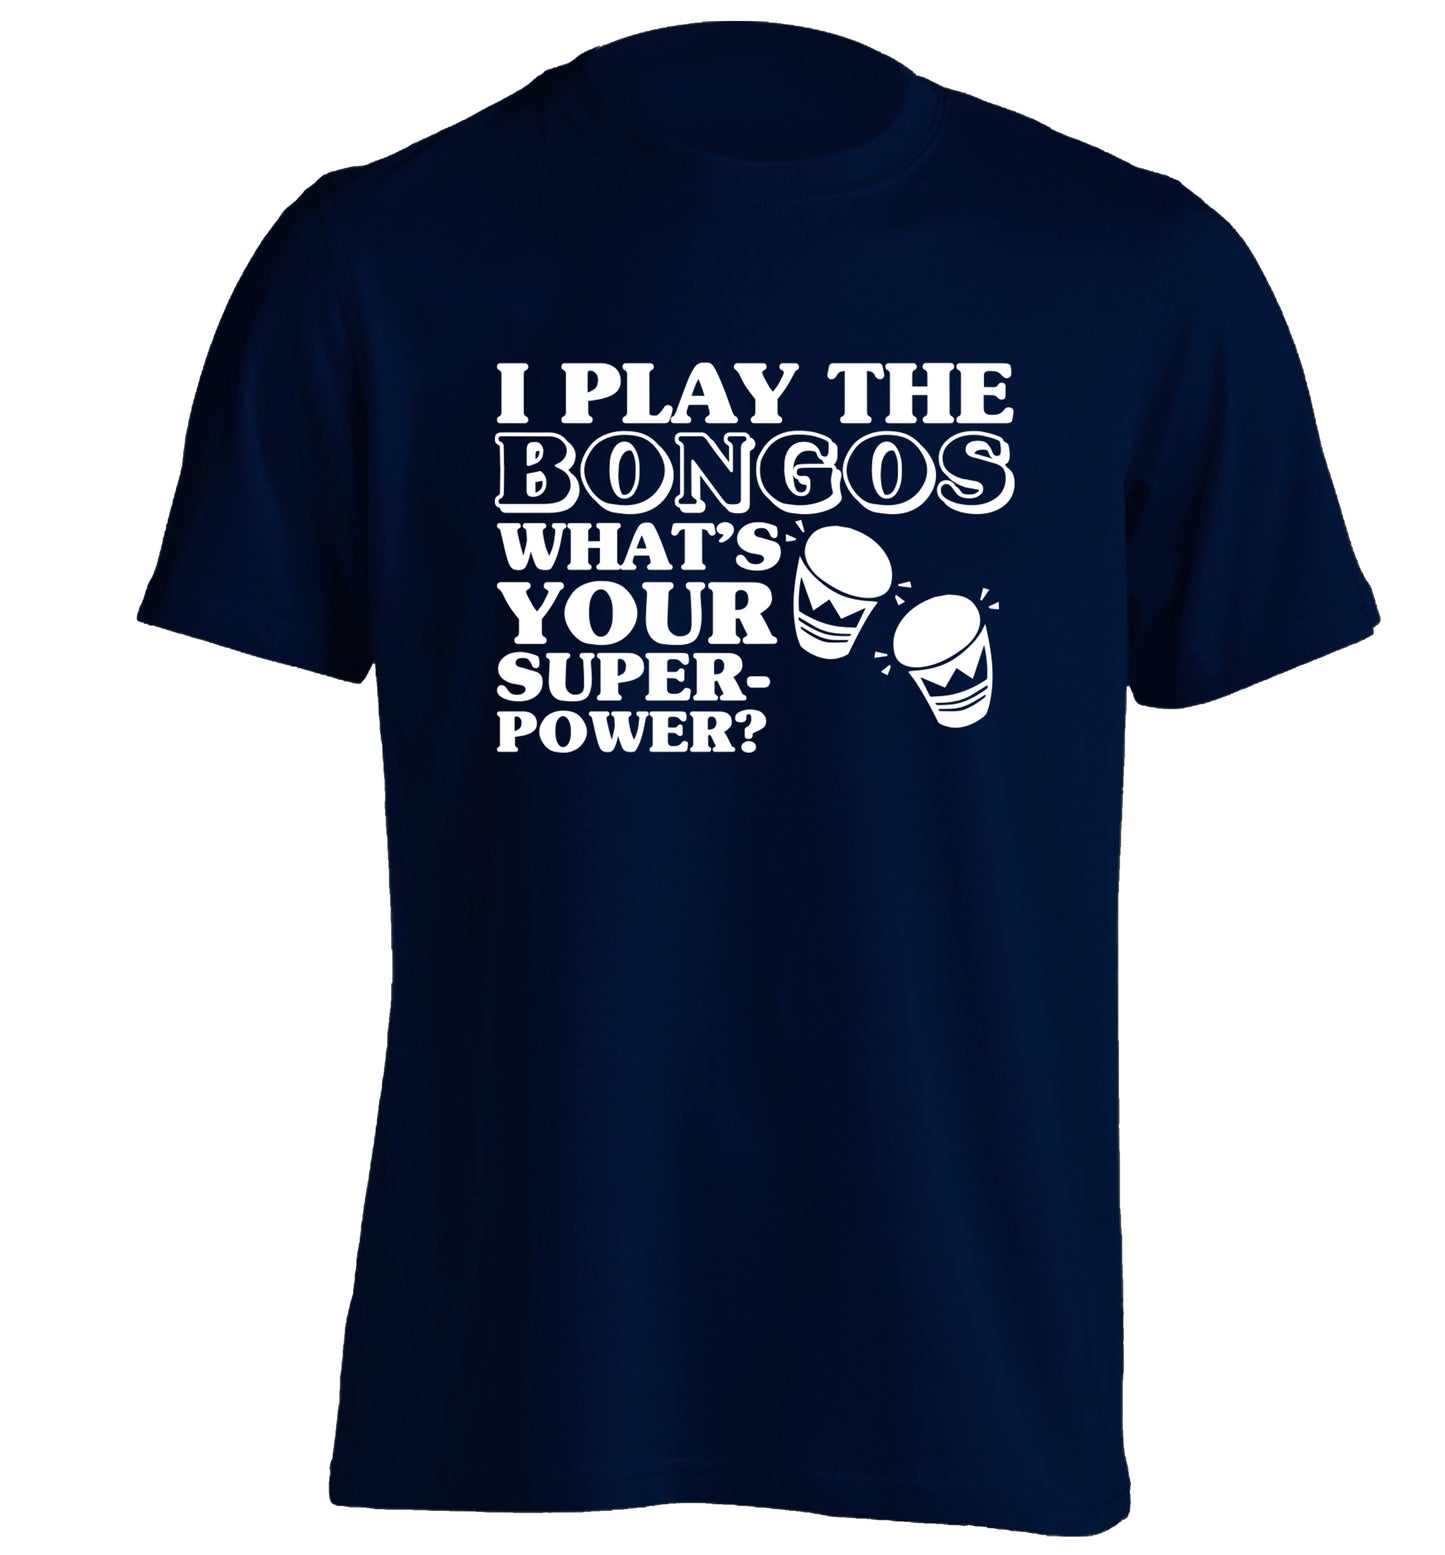 I play the bongos what's your superpower? adults unisexnavy Tshirt 2XL